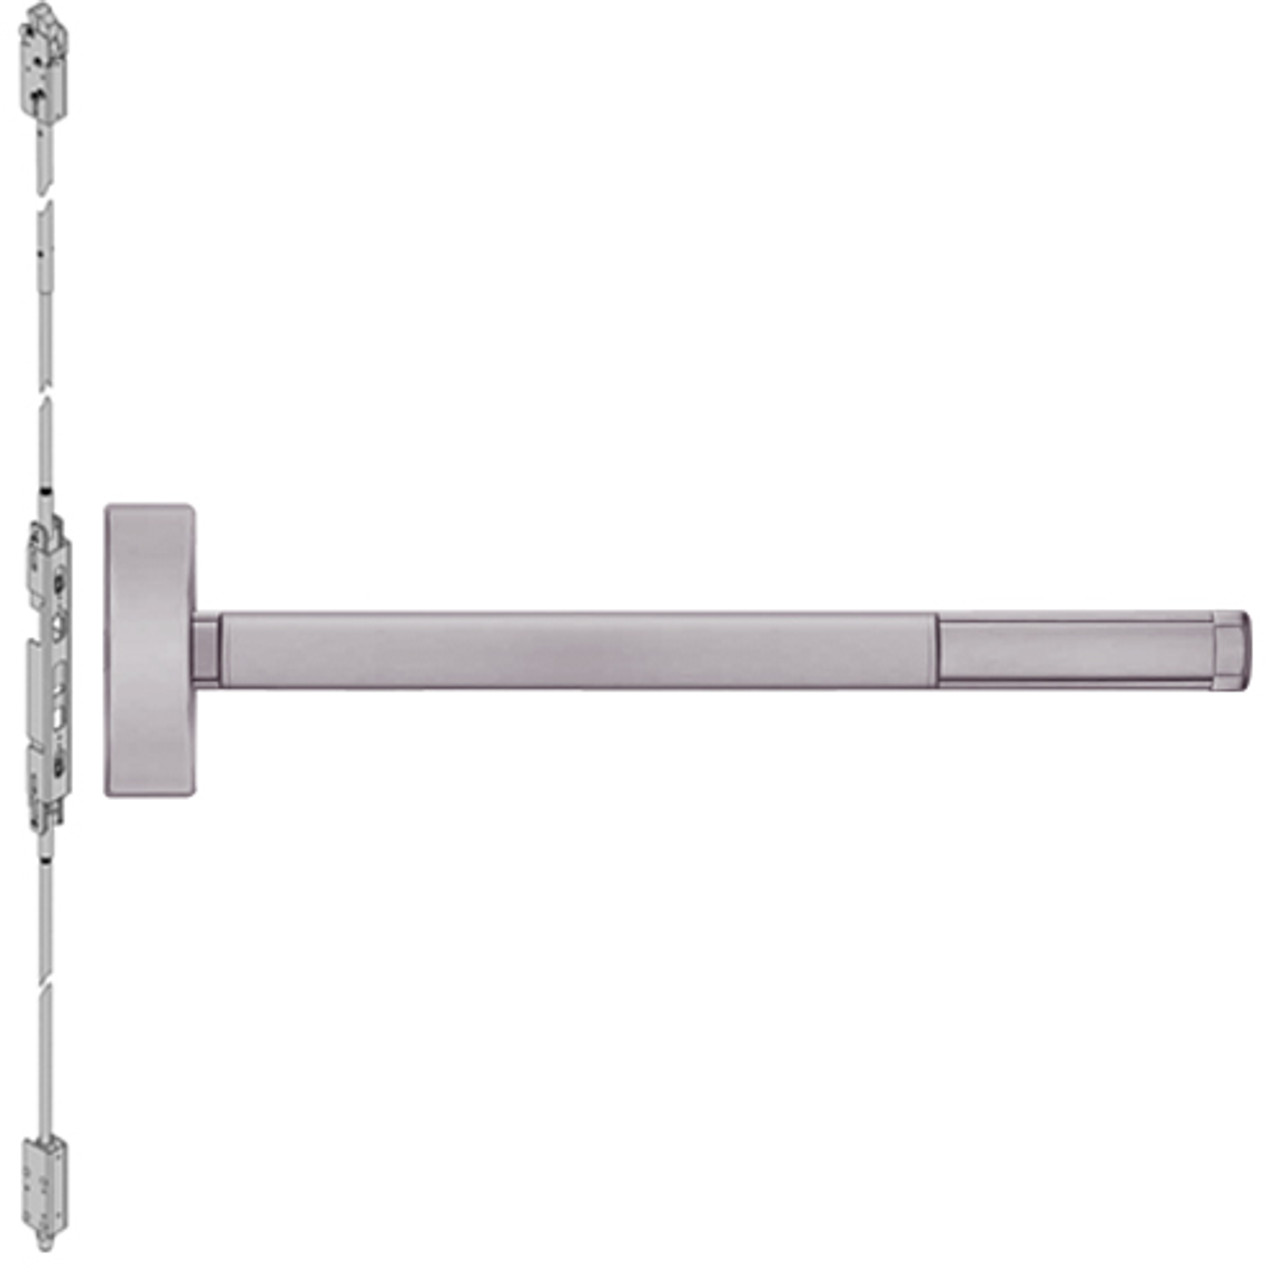 DE2801-630-36 PHI 2800 Series Concealed Vertical Rod Exit Device with Delayed Egress Prepped for Cover Plate in Satin Stainless Steel Finish